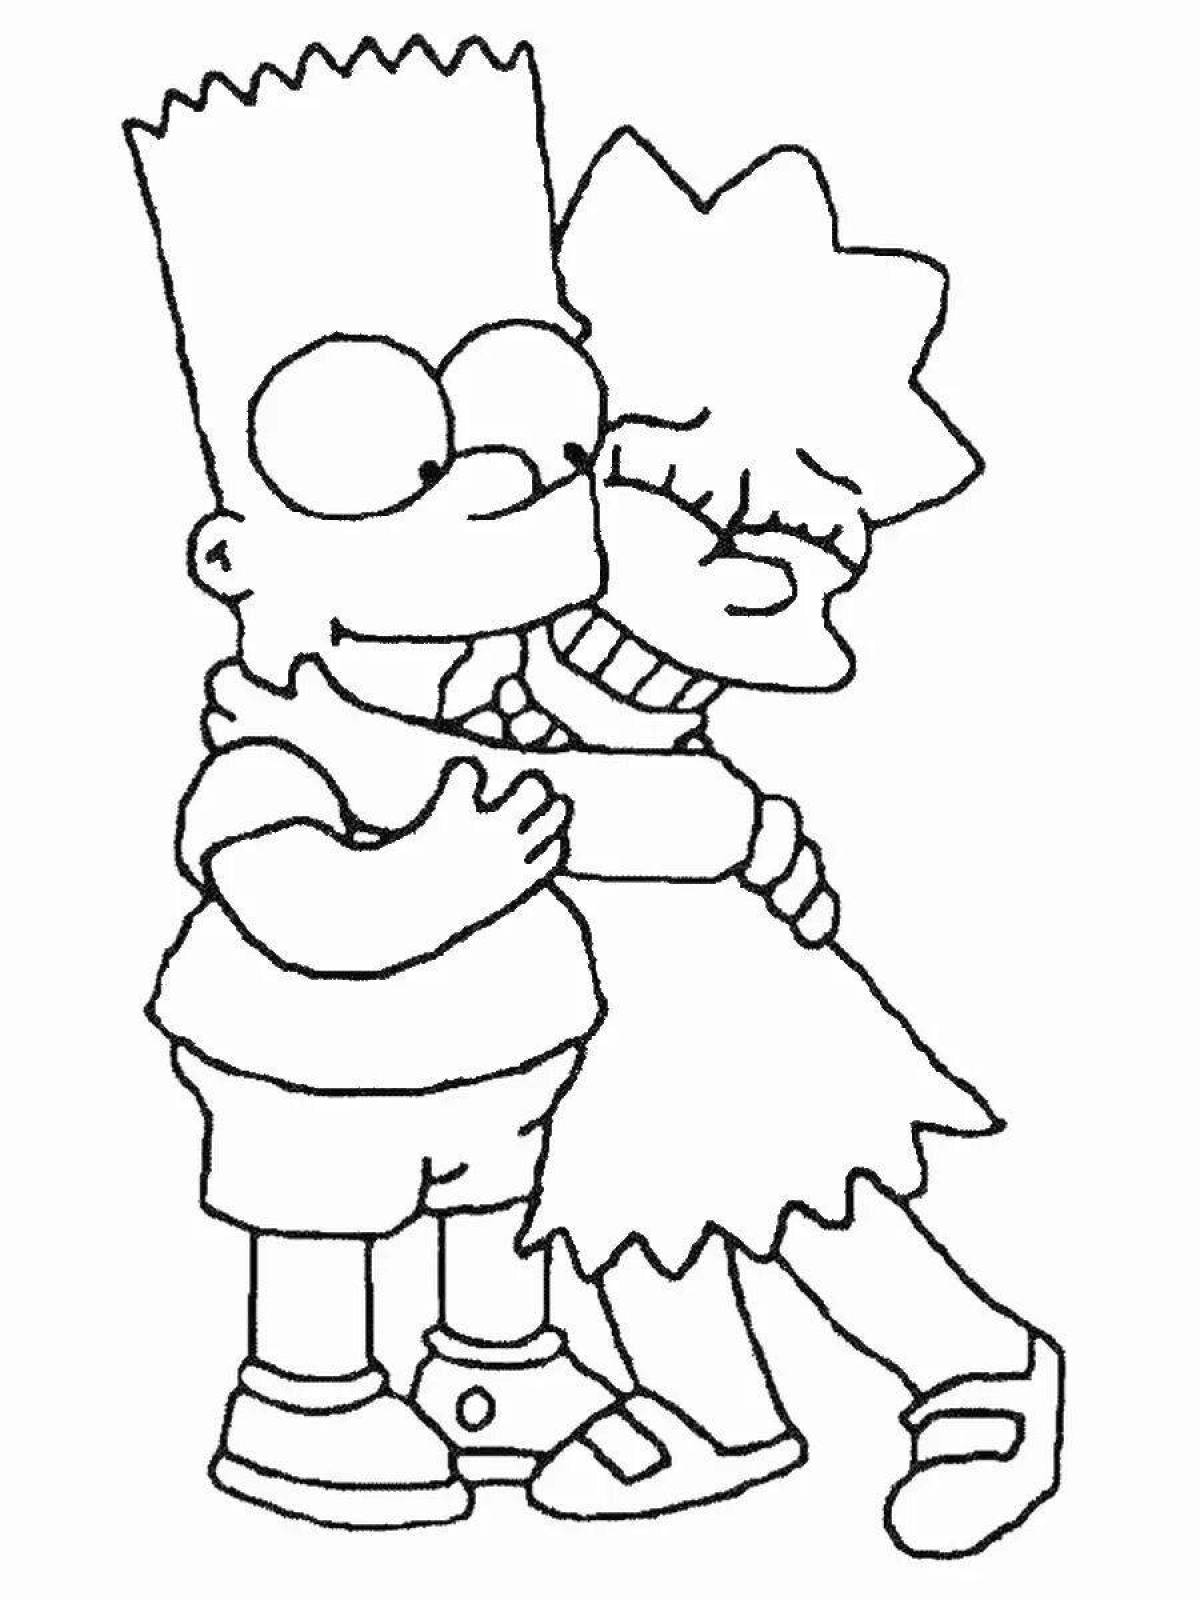 Brother and sister holiday coloring page